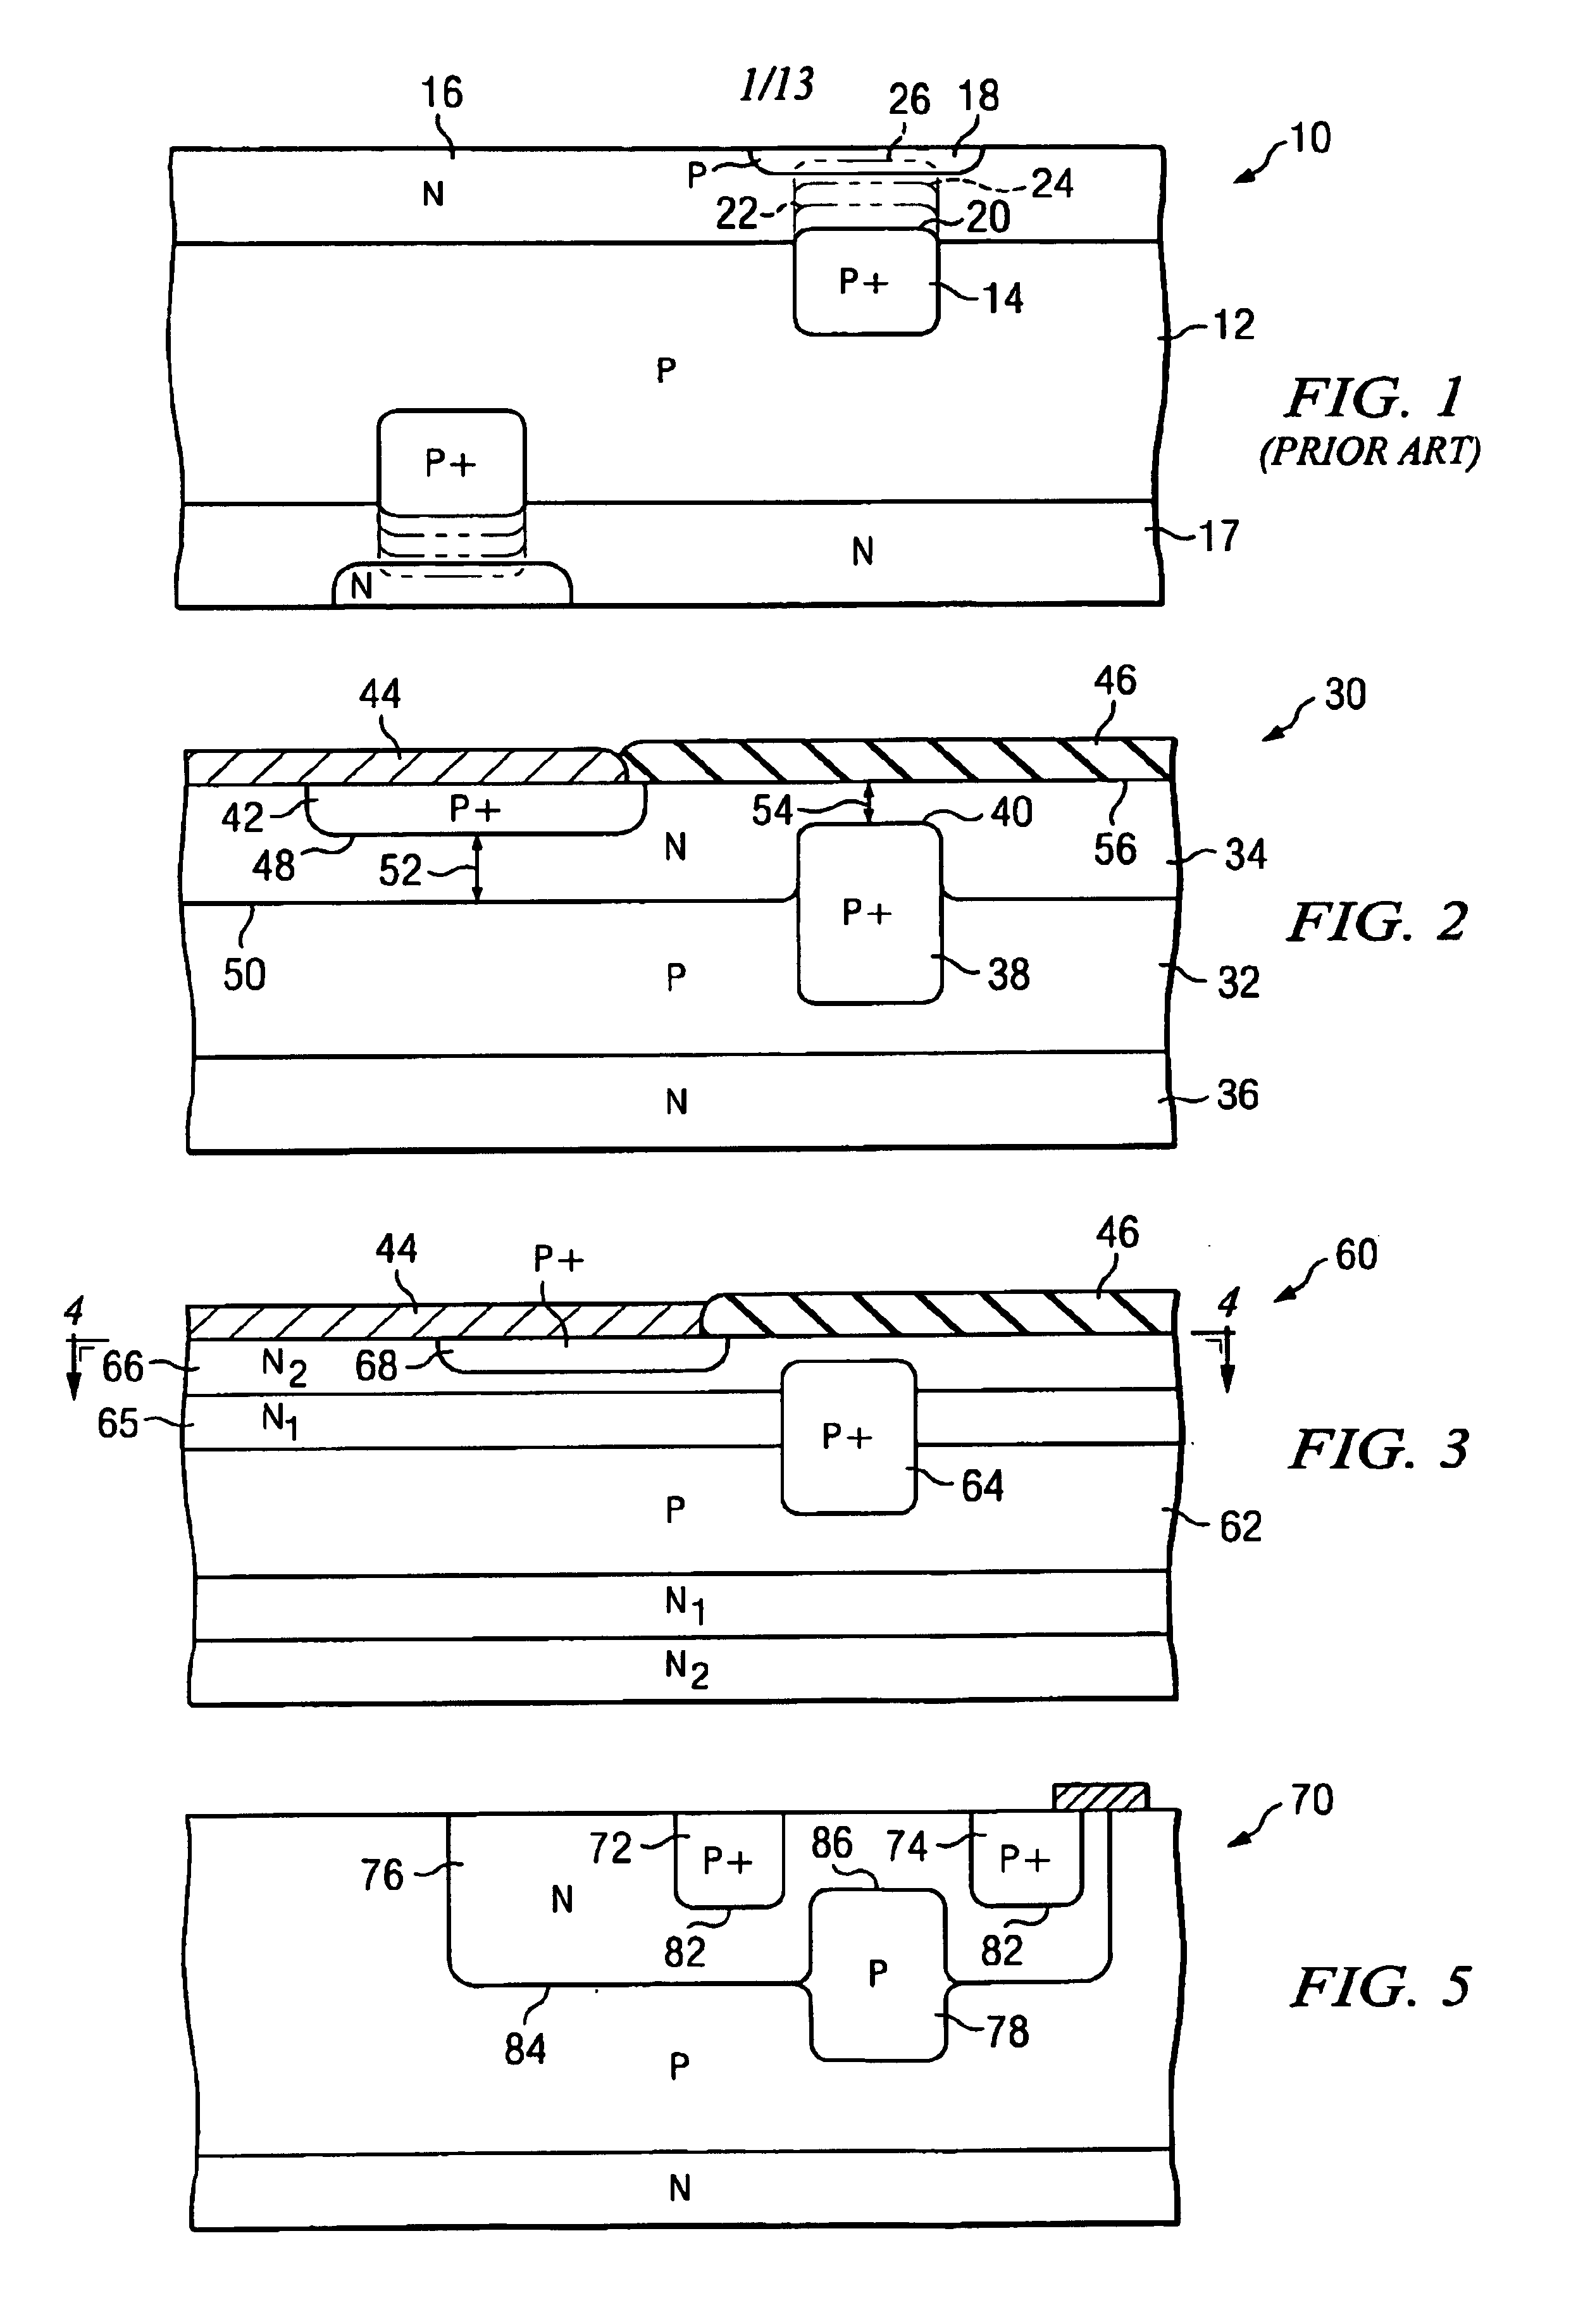 Semiconductor device for low voltage protection with low capacitance